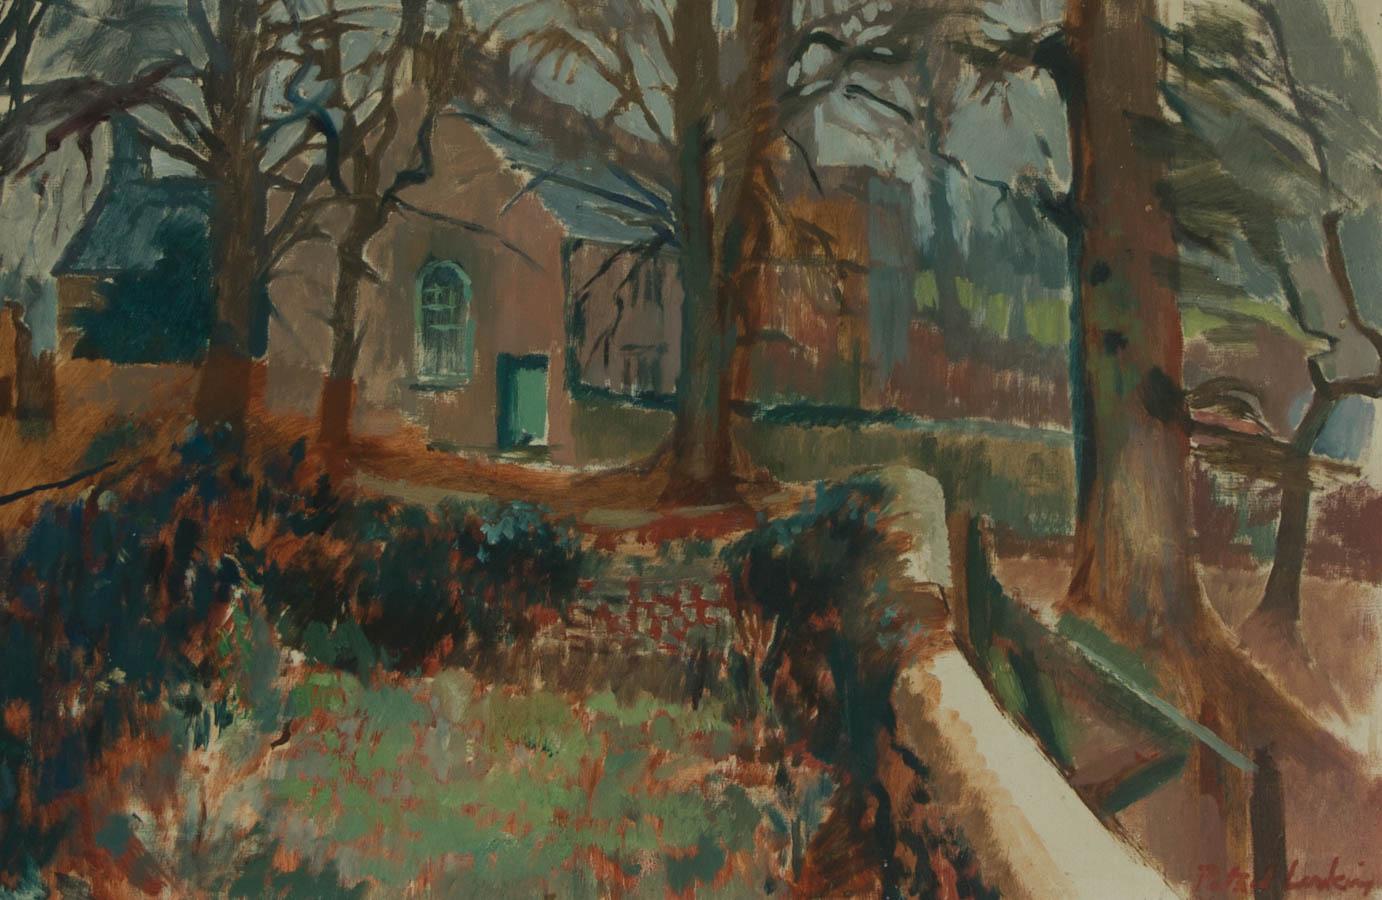 A deft and atmospheric oil showing a walled path running behind a house, surrounded by trees. With bare branched trees and a warm, earthy palette the painting seems to be set in late Autumn. The confident composition and assured brush strokes